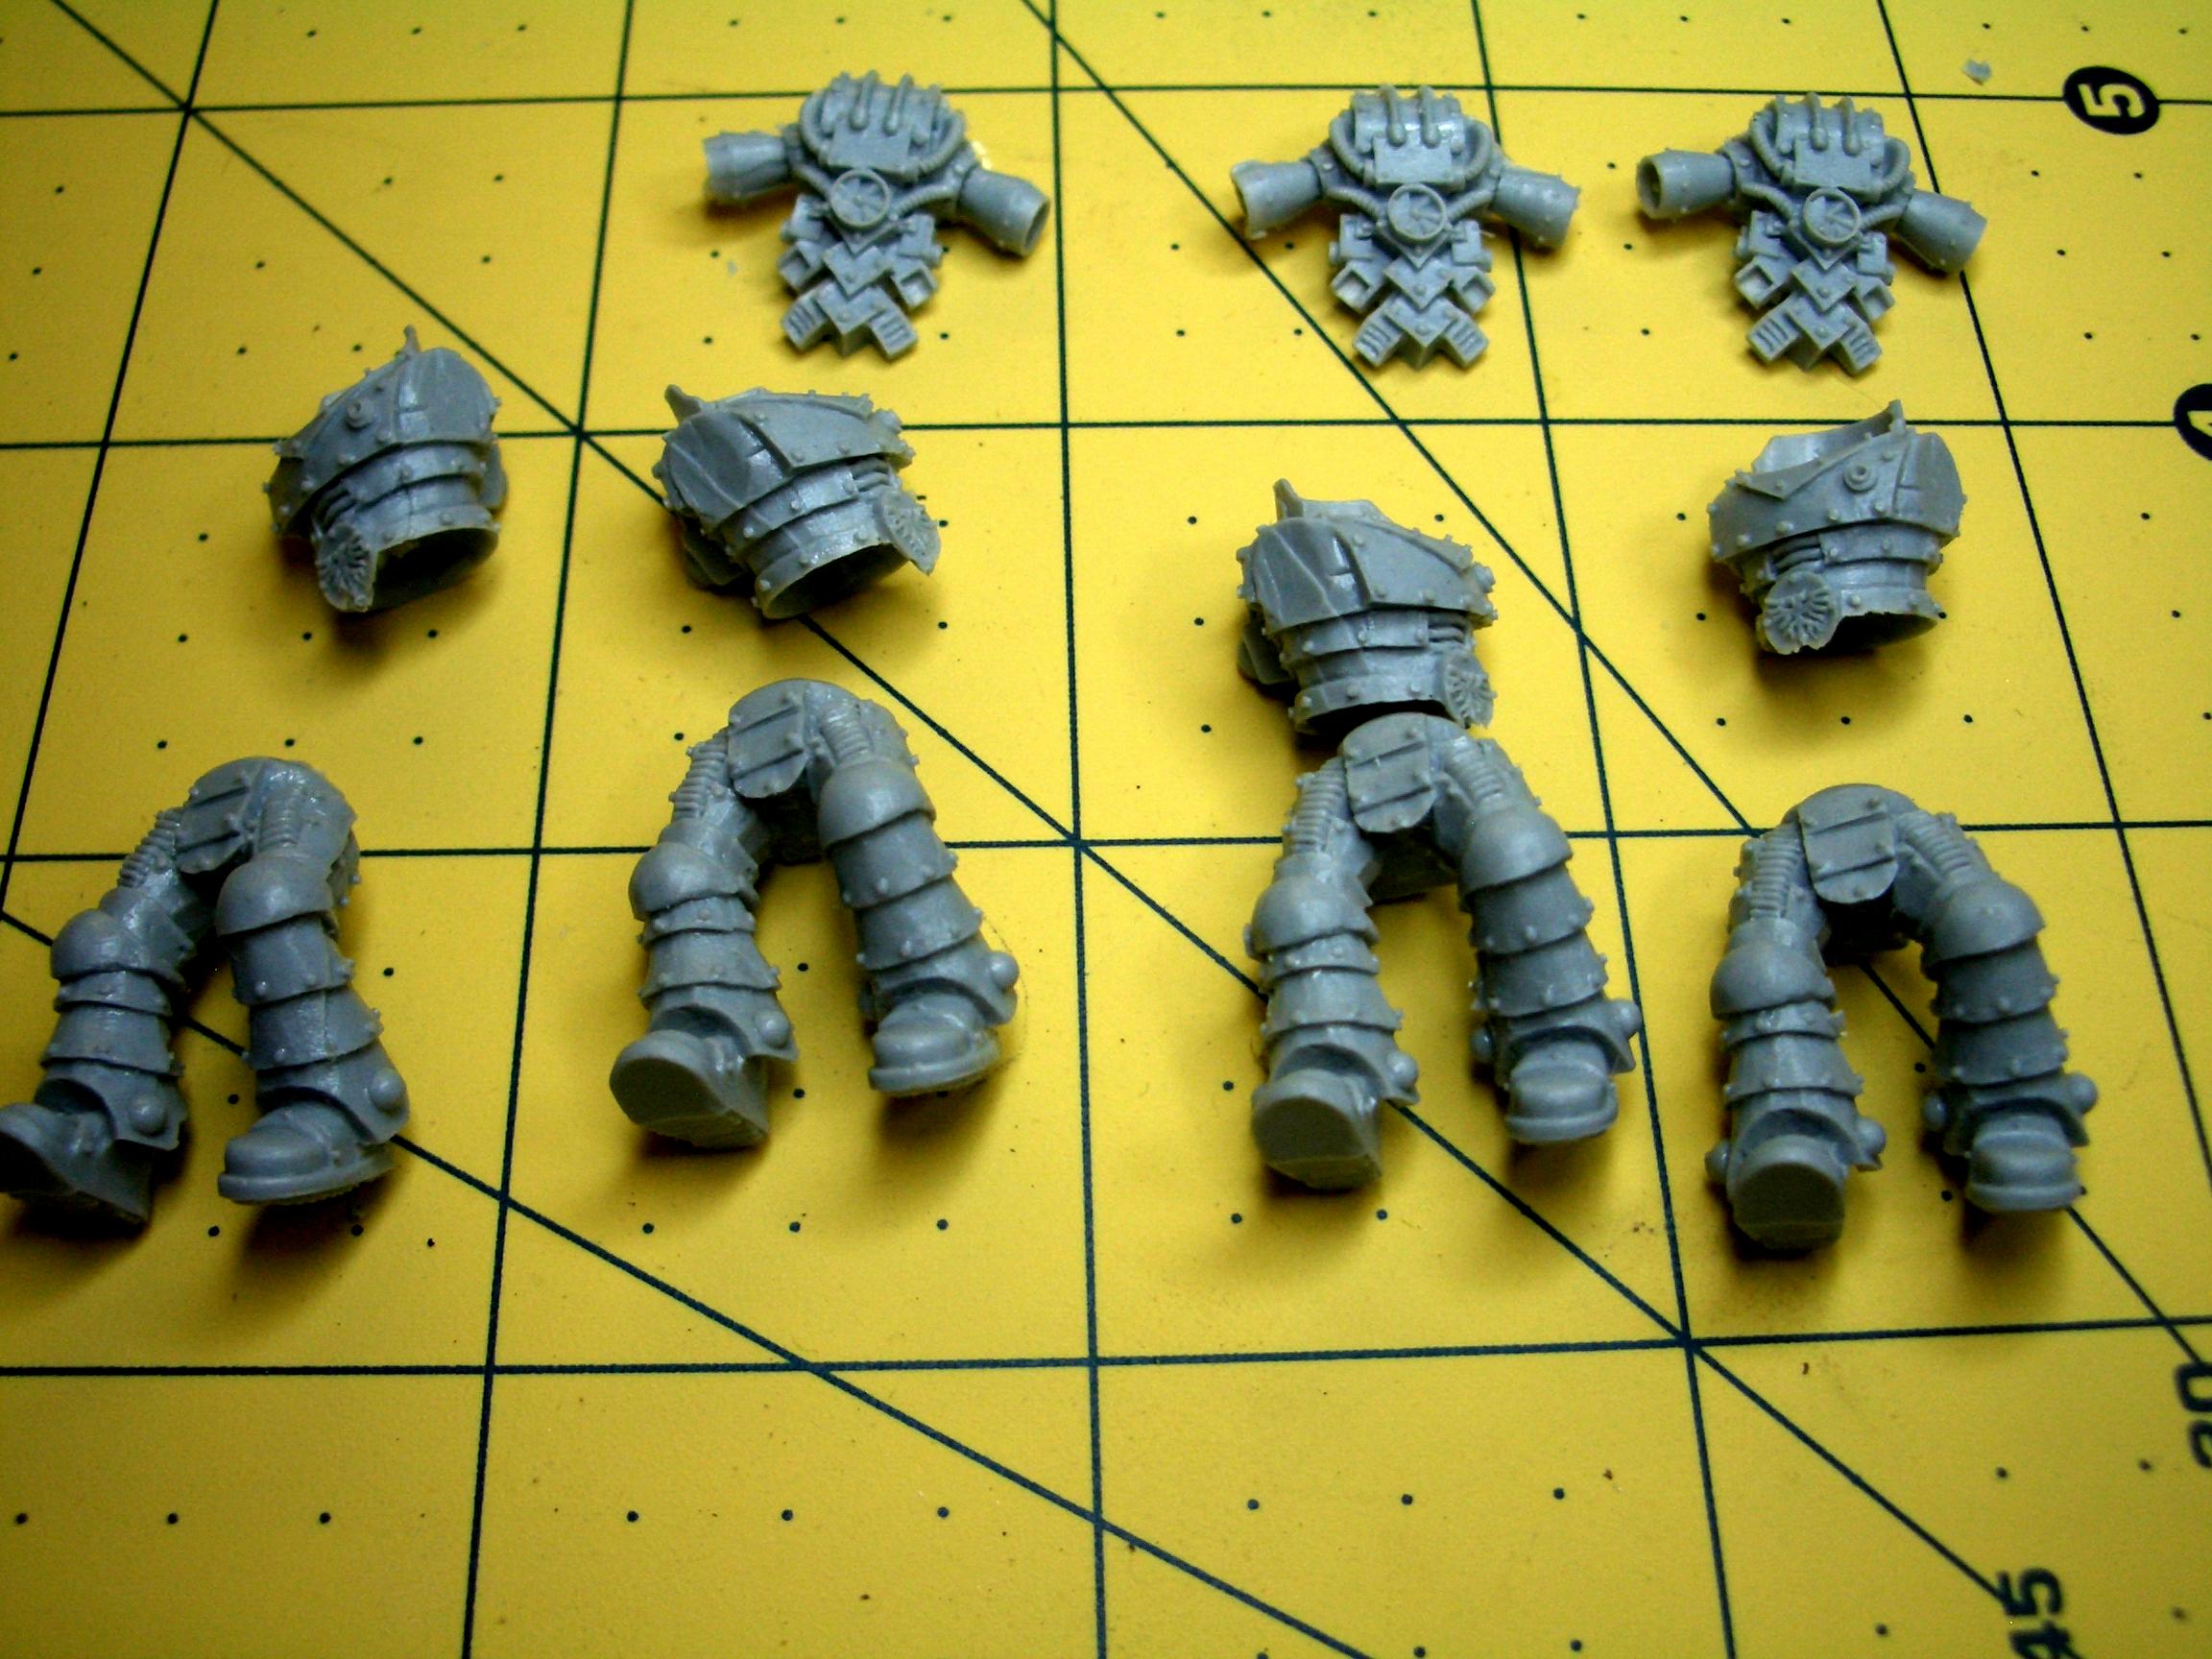 Astral, Astral Claws, Celestial Lions, Claws, Space Marines, Warhammer 40,000, Work In Progress, Xi Legion